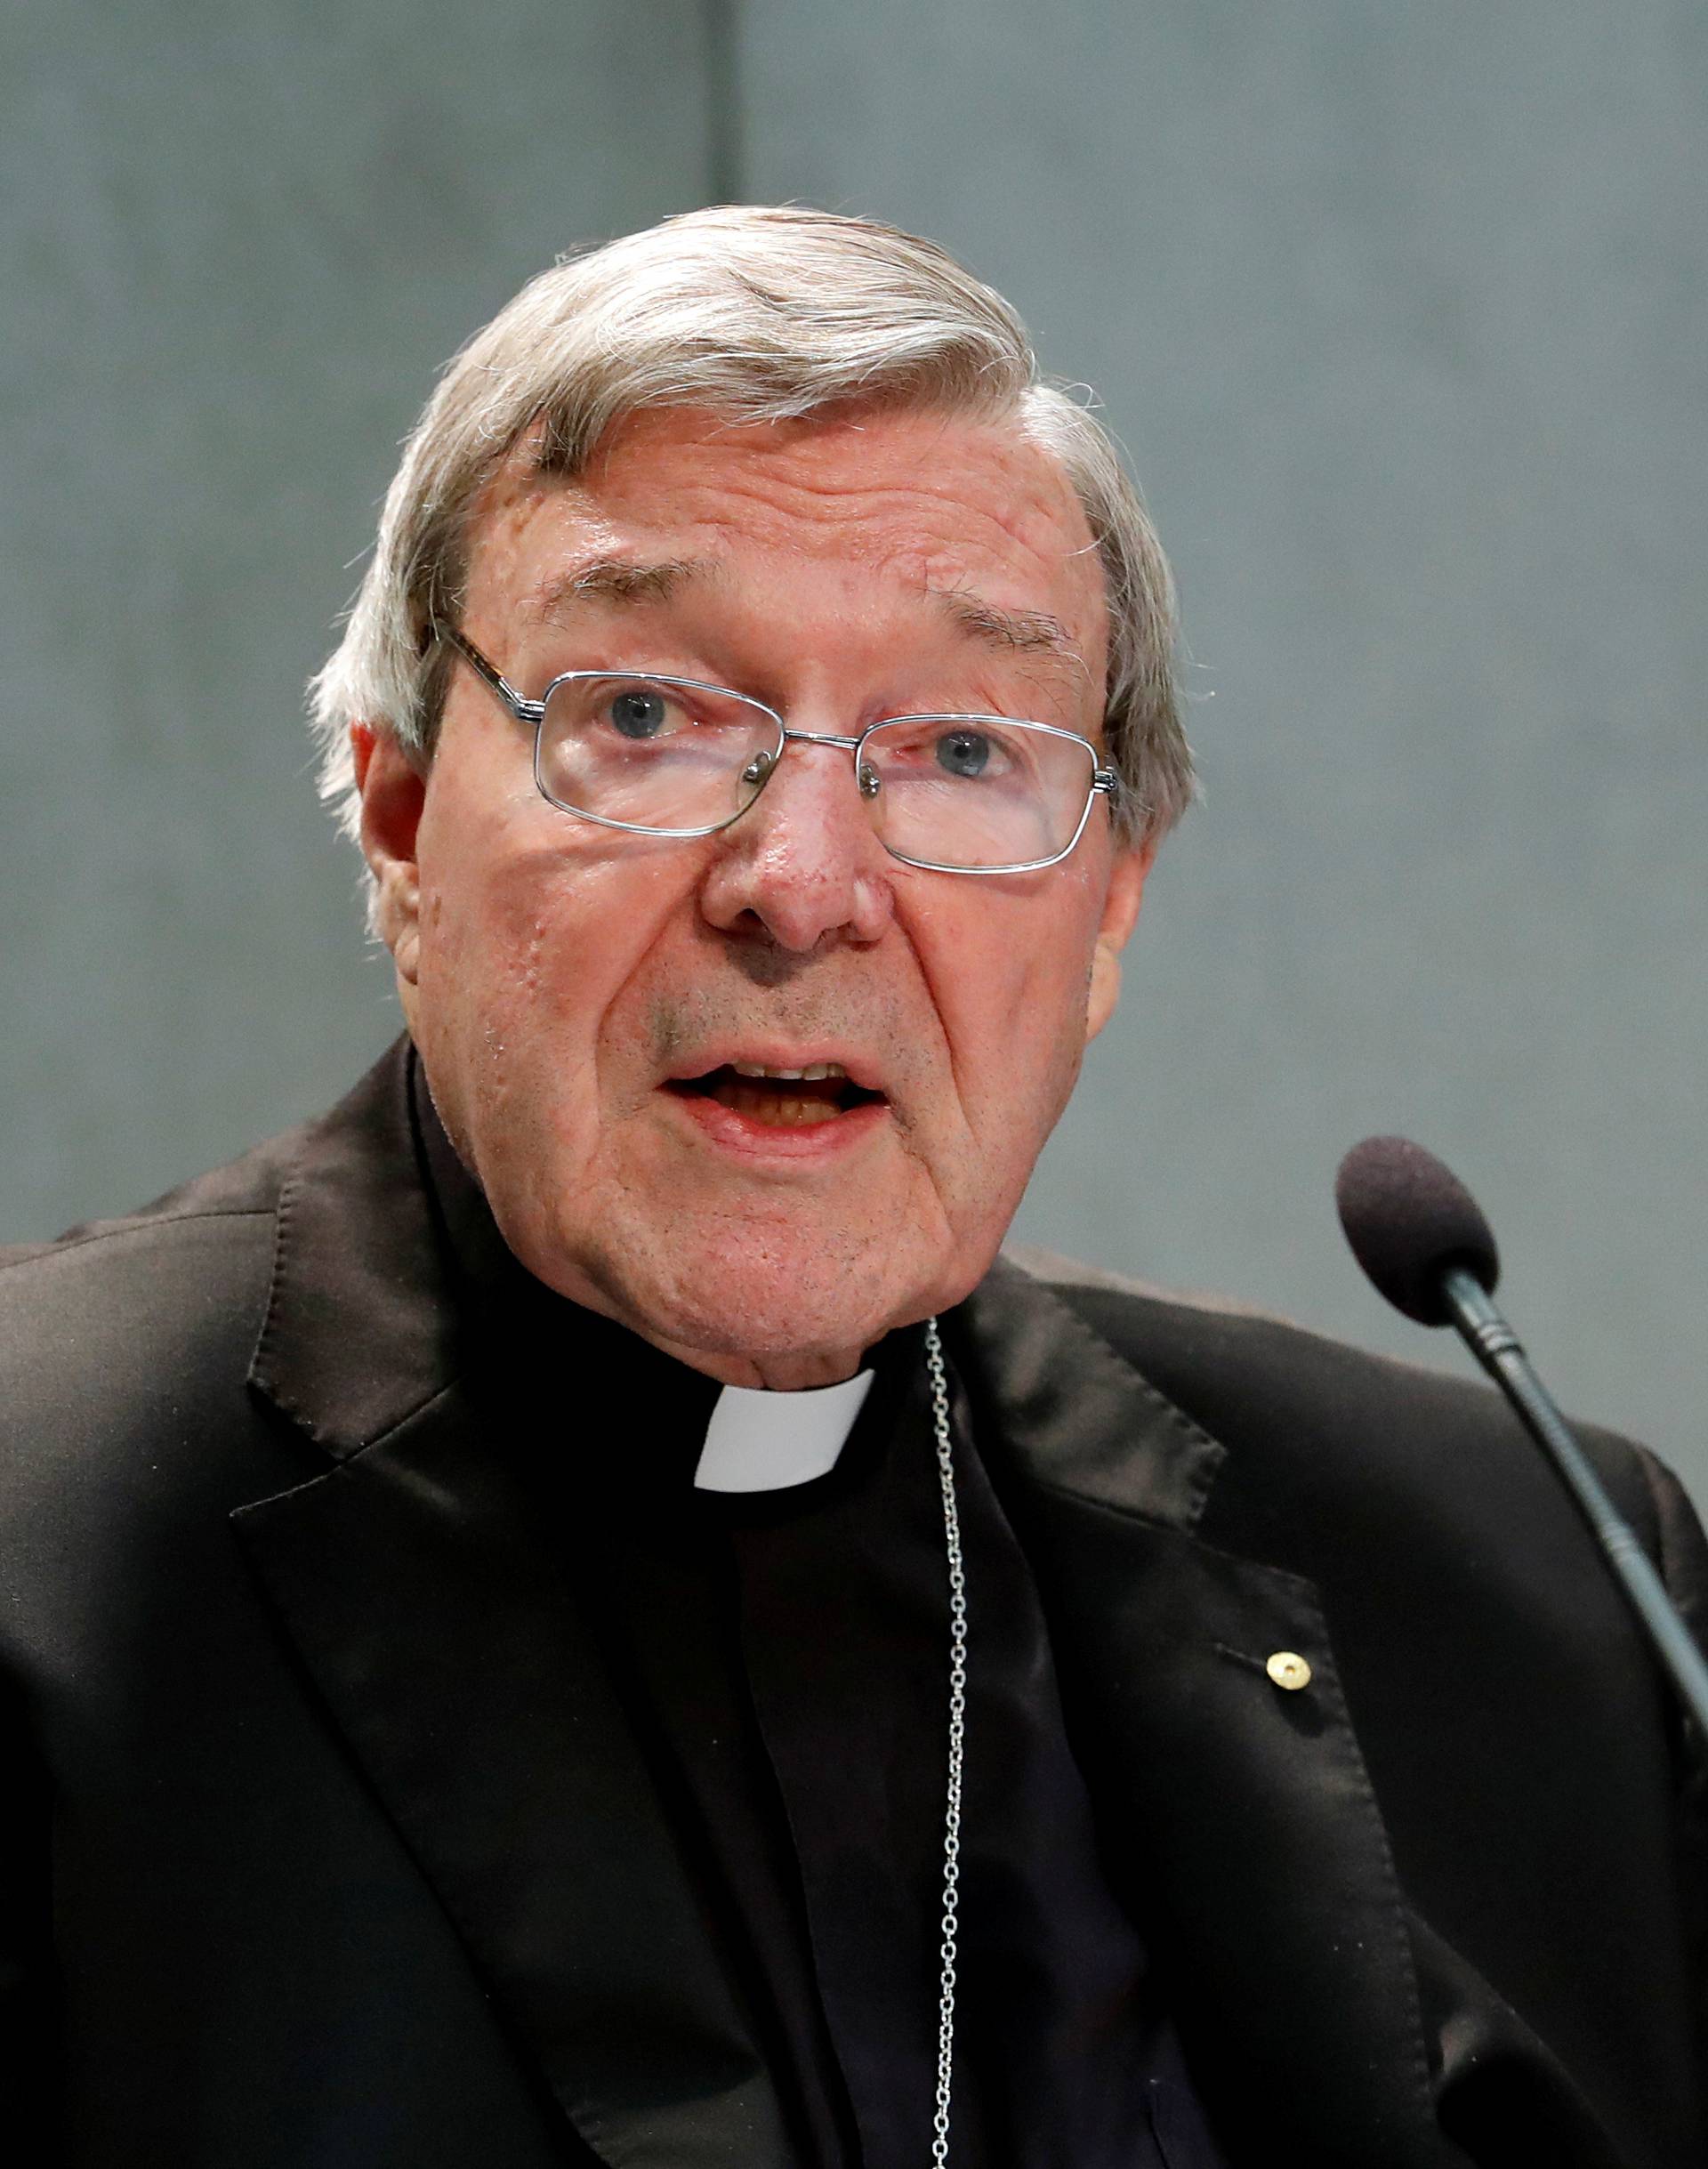 FILE PHOTO: Cardinal George Pell attends a news conference at the Vatican